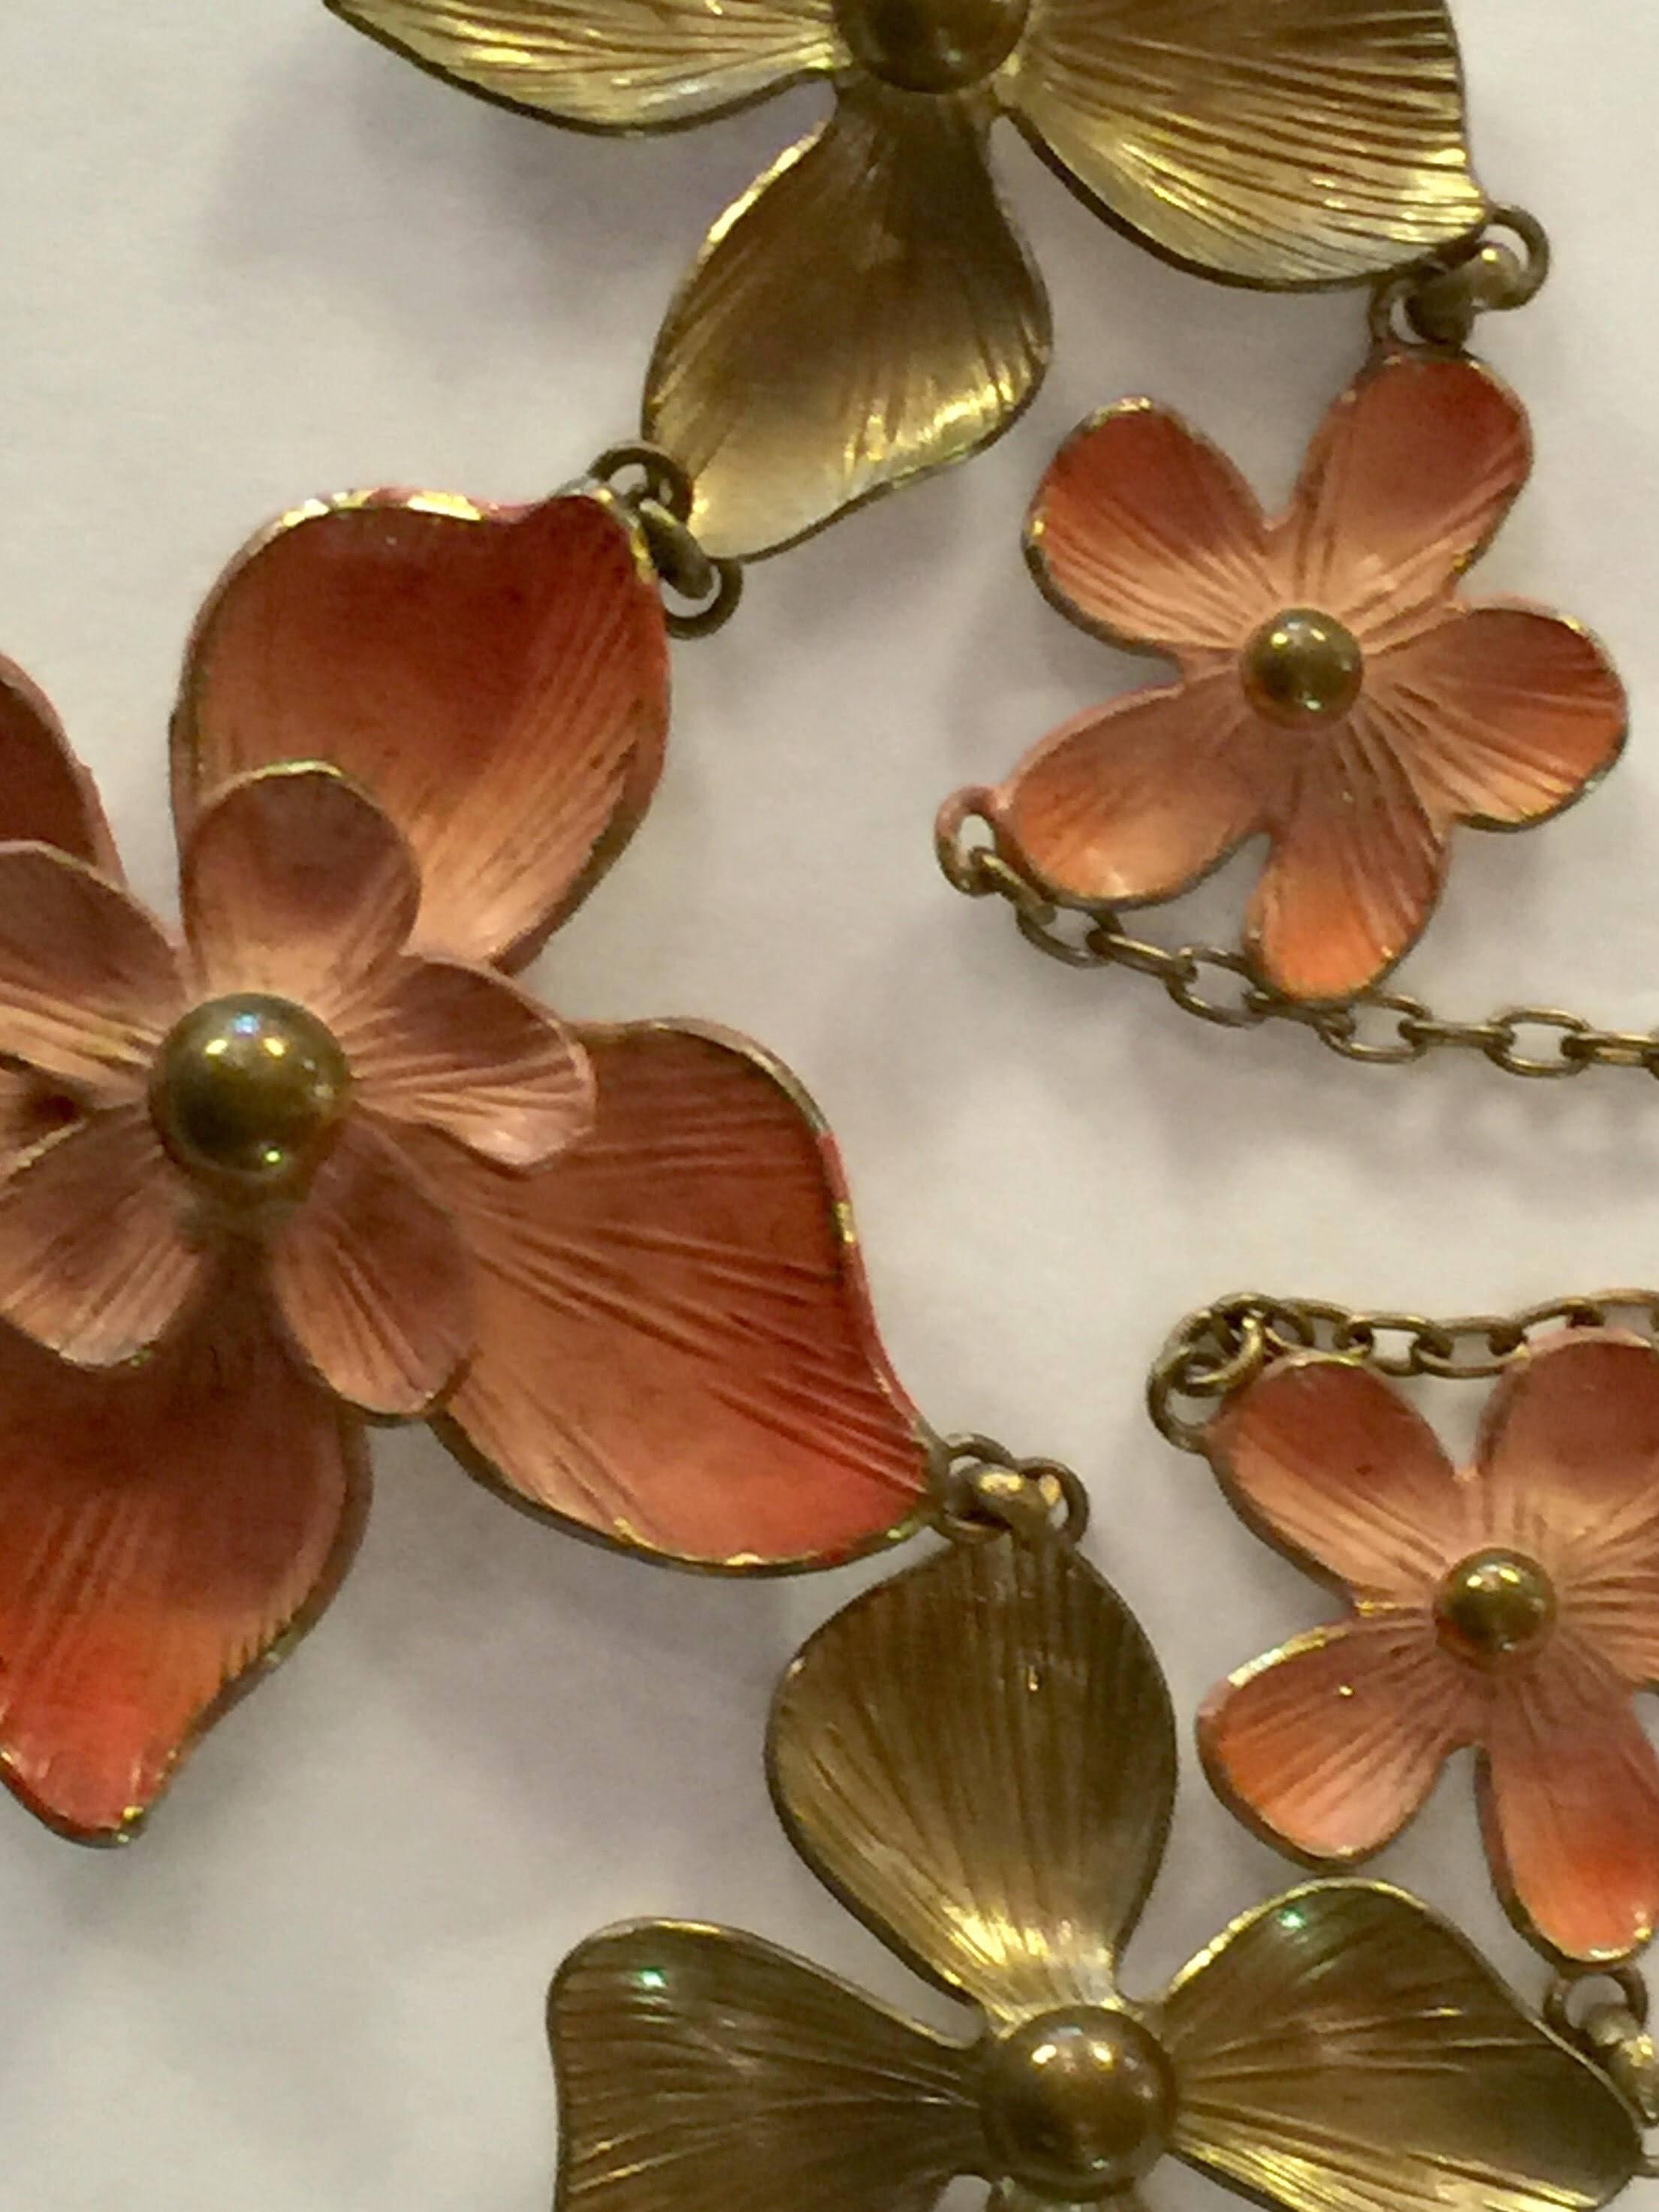 Subtle and sweet, this lovely necklace consists of shiny goldtone backed floral elements, alternating ones of which have been matte gilt with accenting coral sotly enamelled colorized detailing. The brass chain necklace section of the necklace is